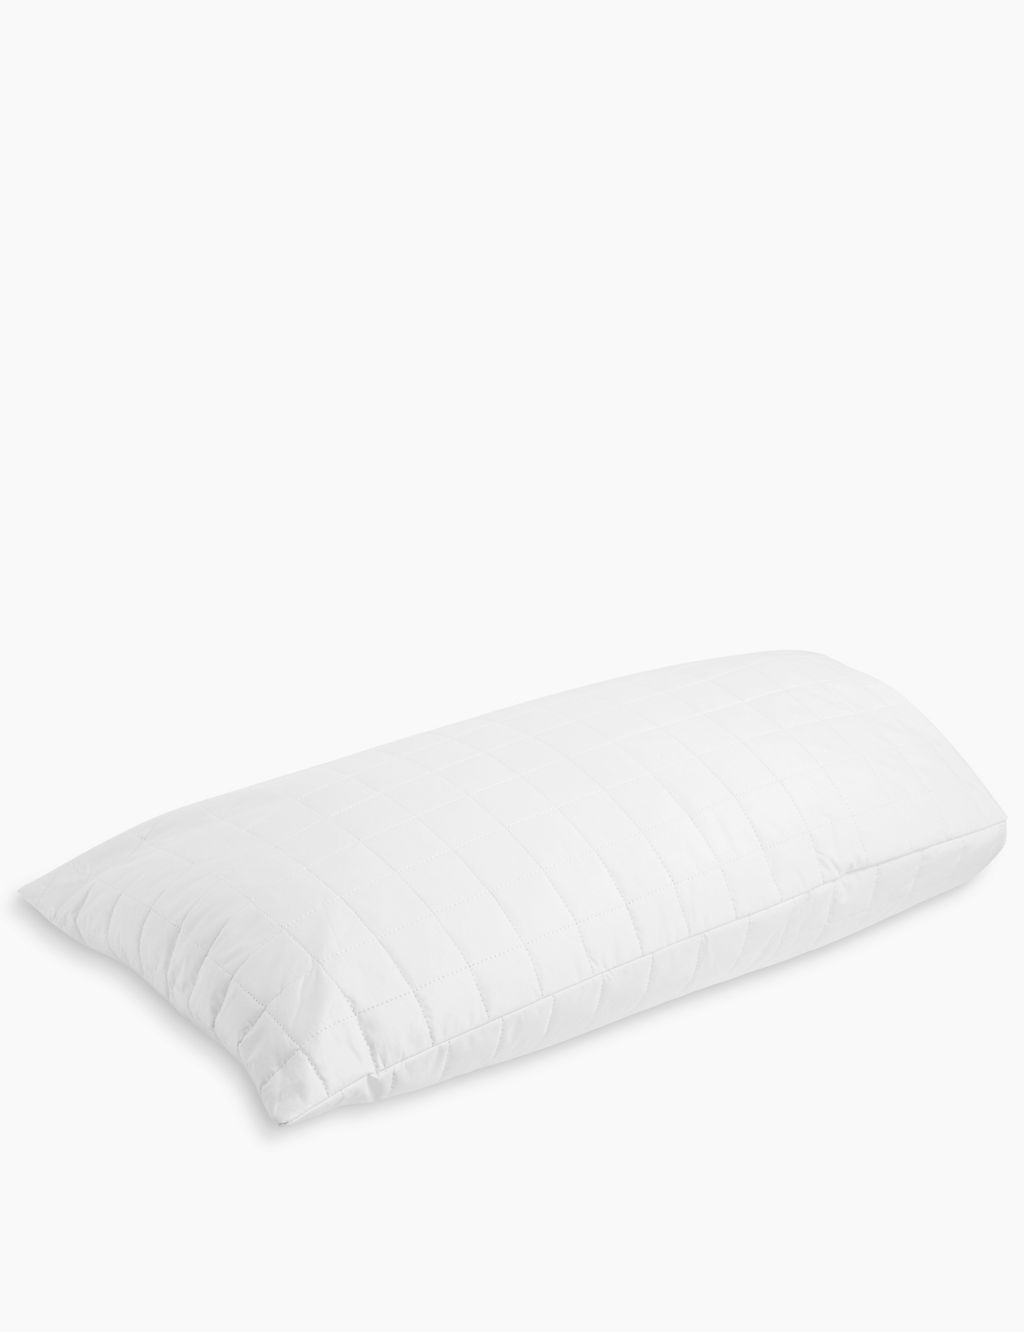 Feels Like Down Pillow Protector 1 of 4